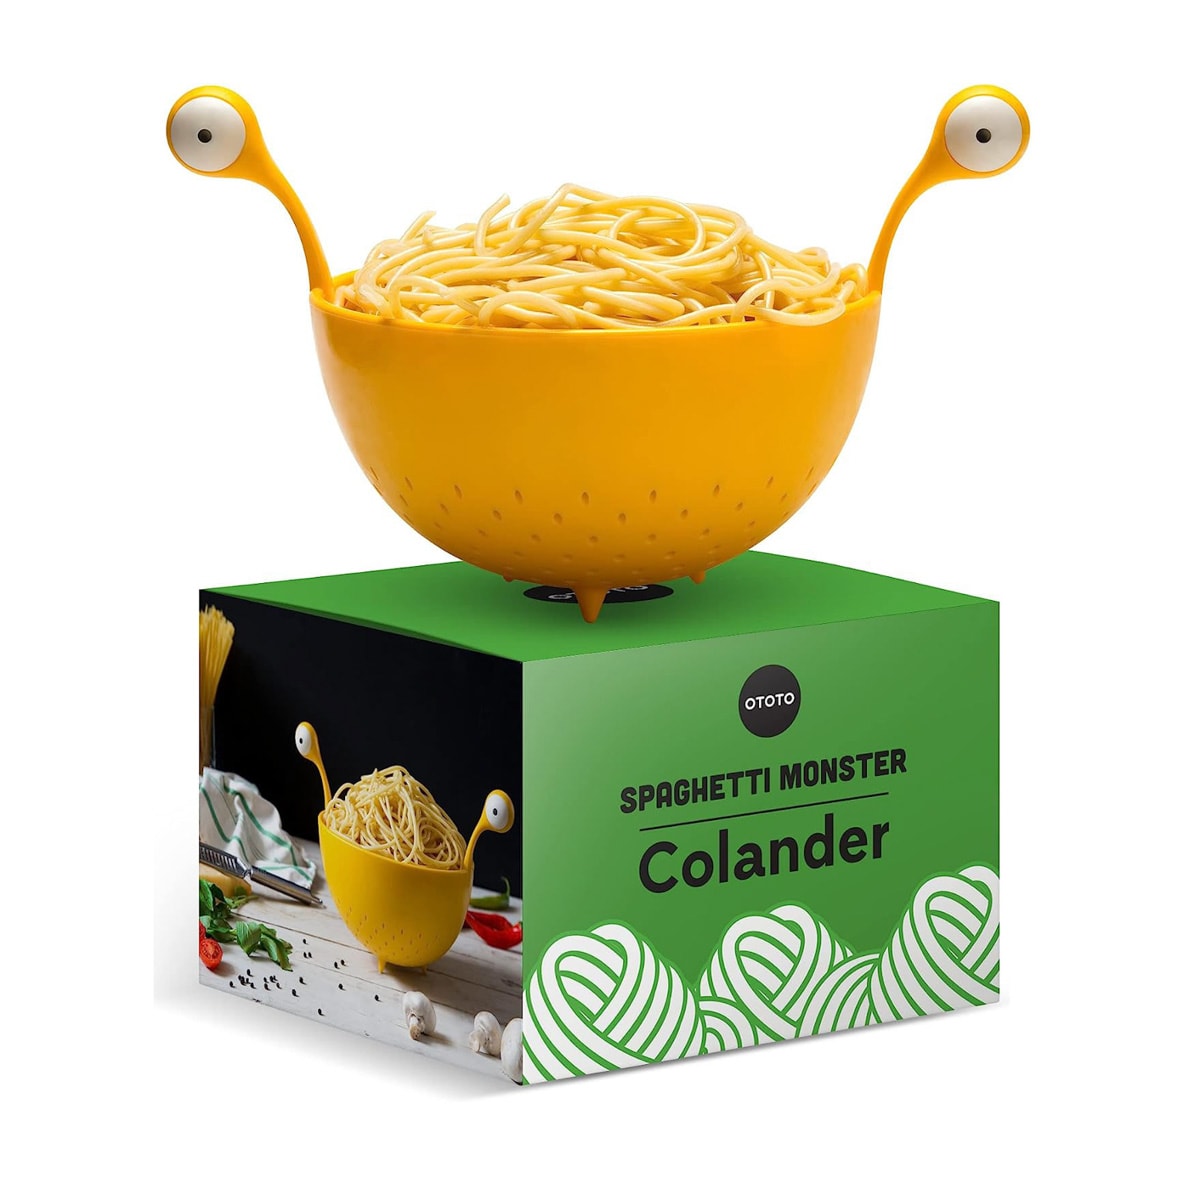 10 Must-Have Kitchen Accessories for Pasta Lovers – LifeSavvy